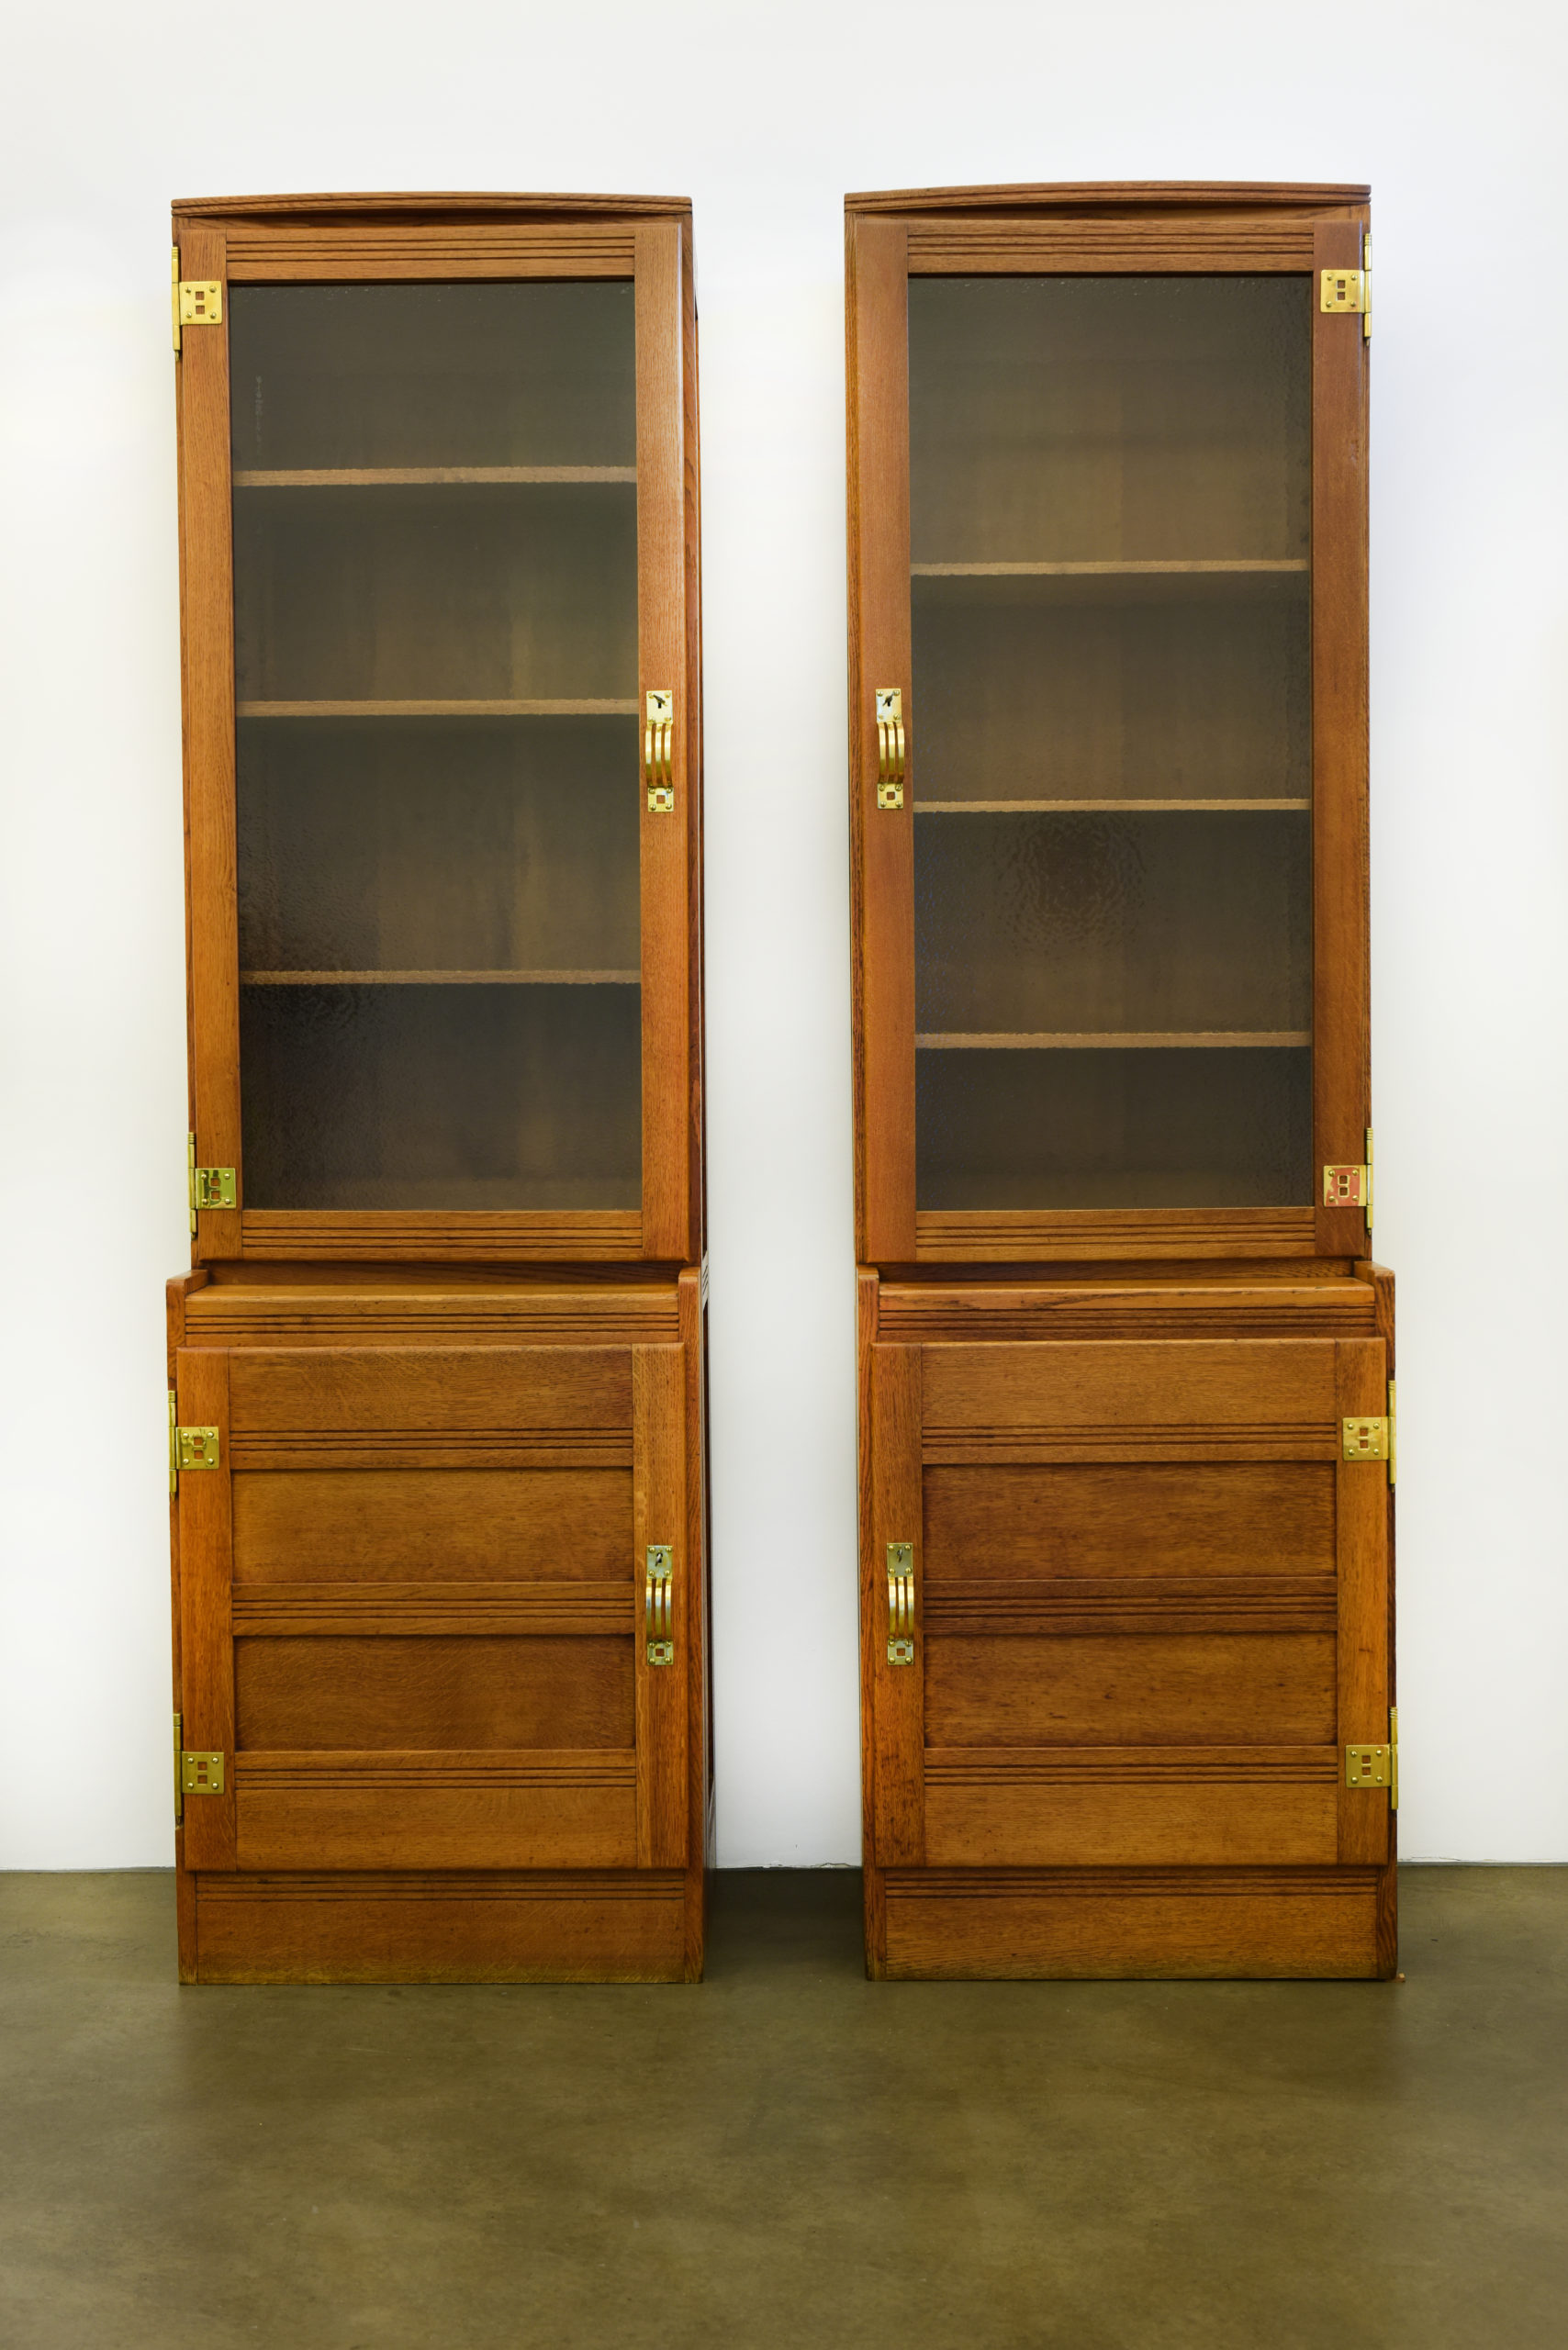 Gustave Serrurier-Bovy: Pair of bookcases, 1904, oak with handles in brass